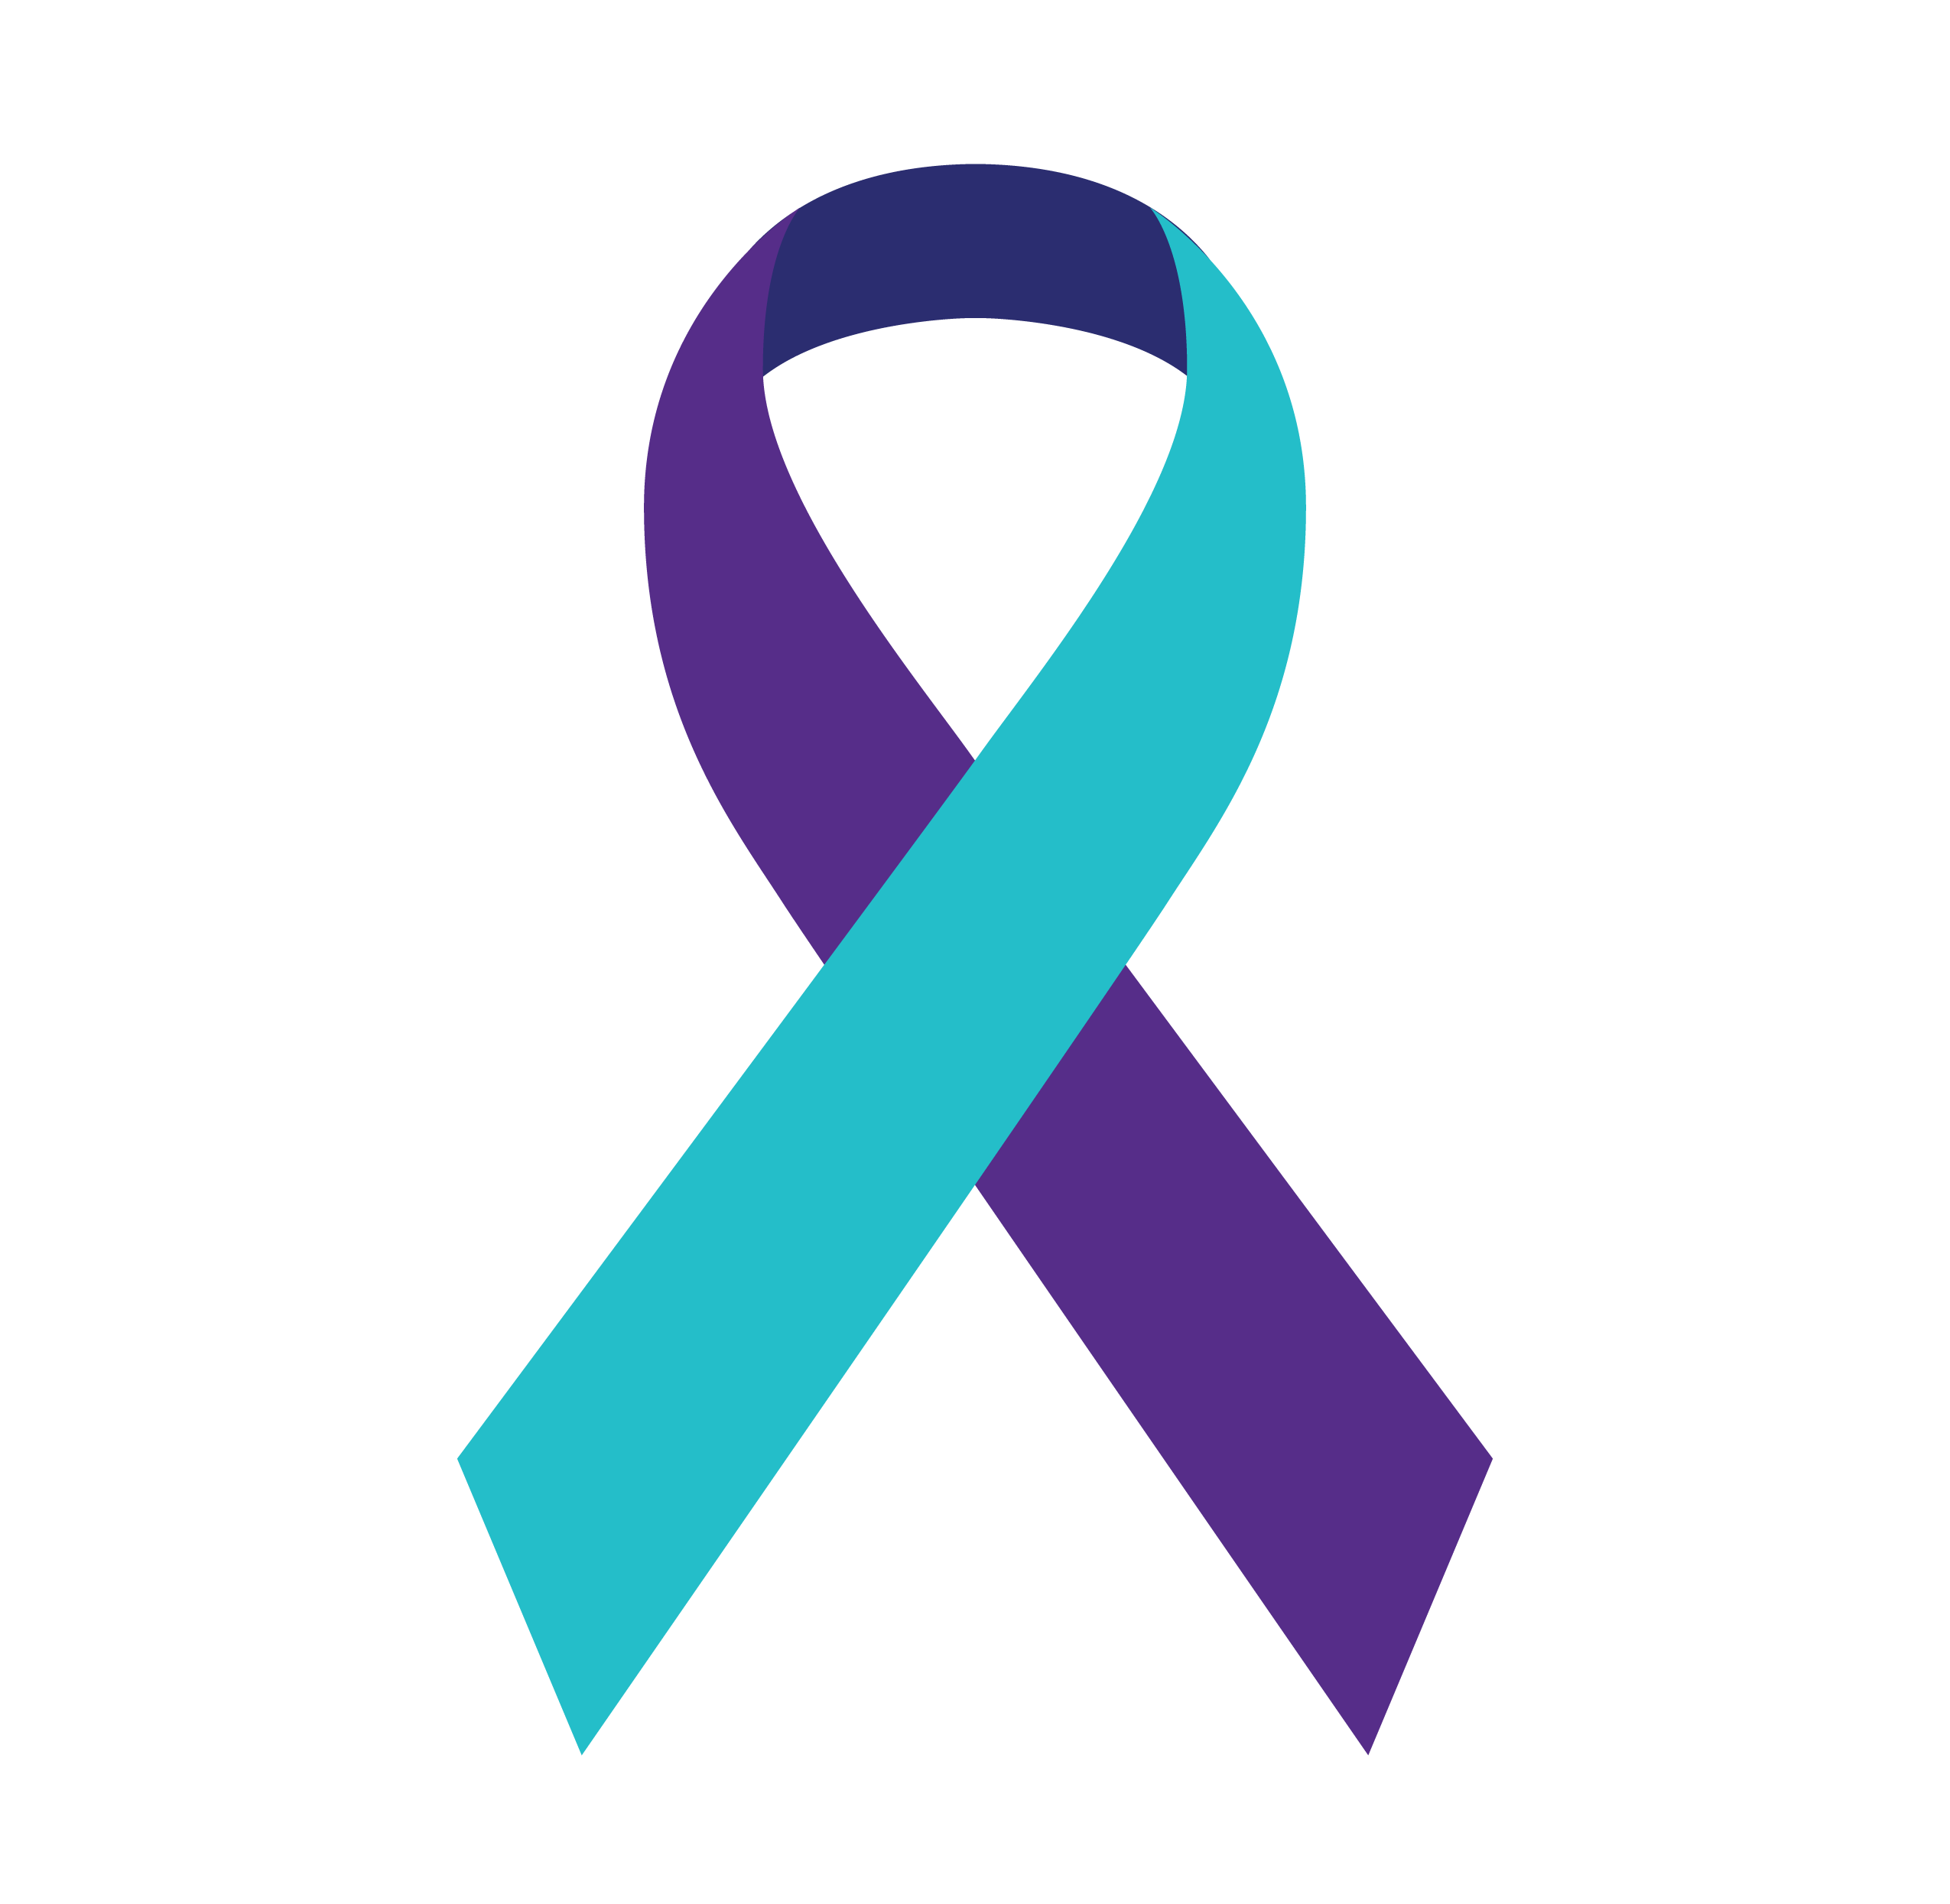 Dad clipart ribbon. Raise awareness about suicide